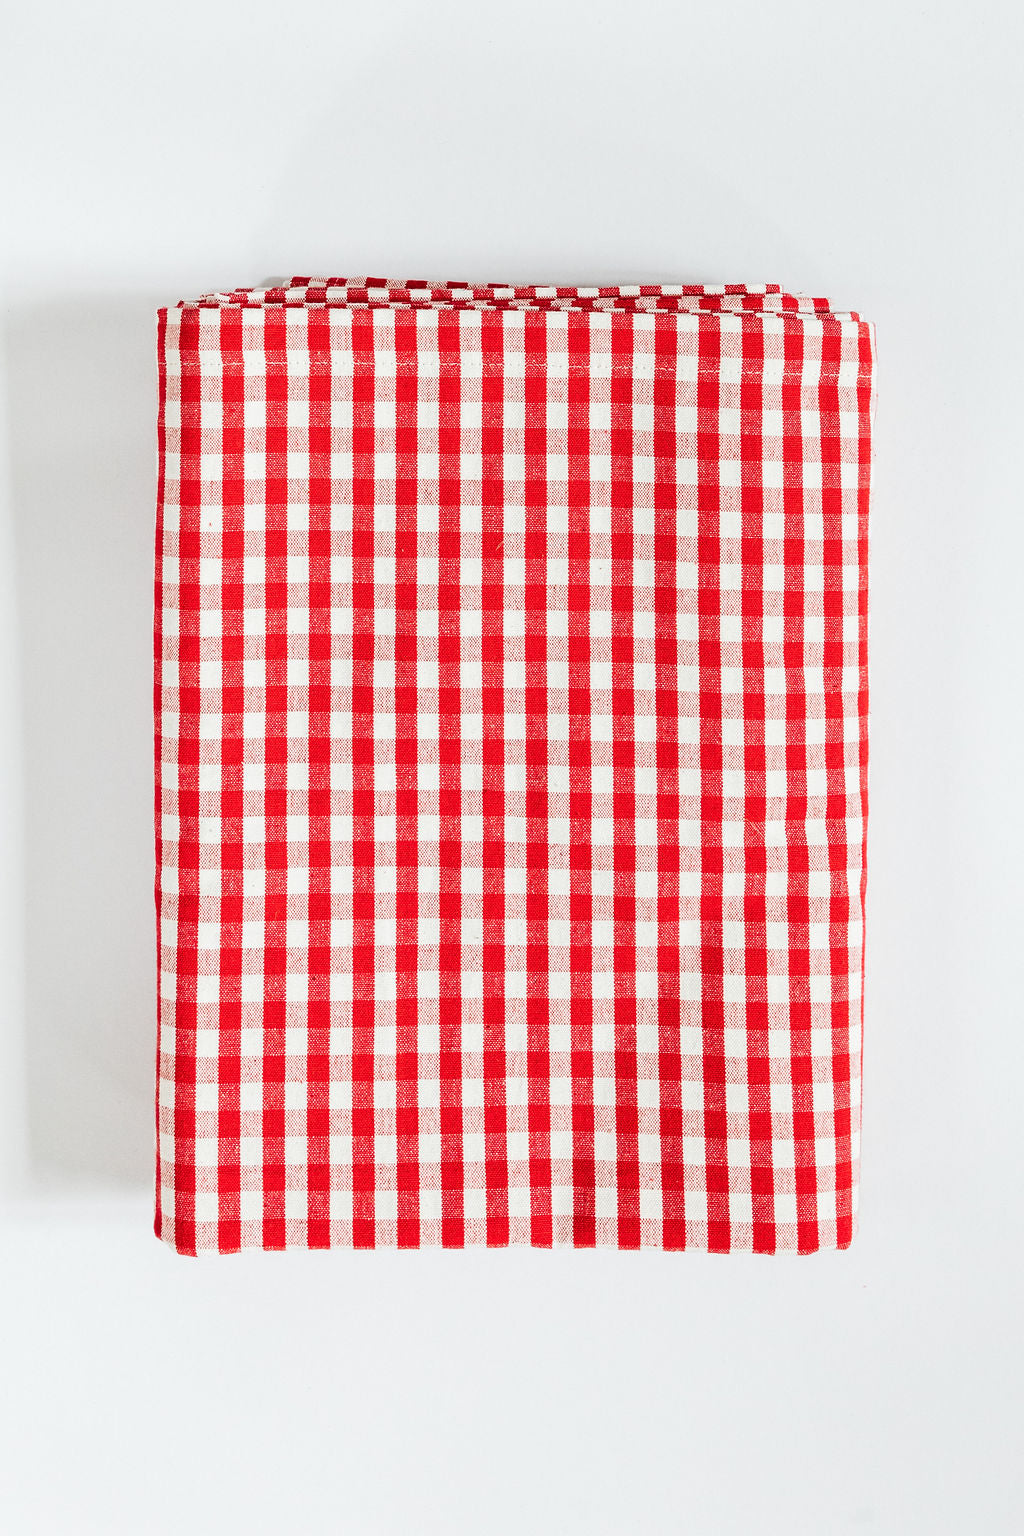 Gingham Check Red Table Cloth